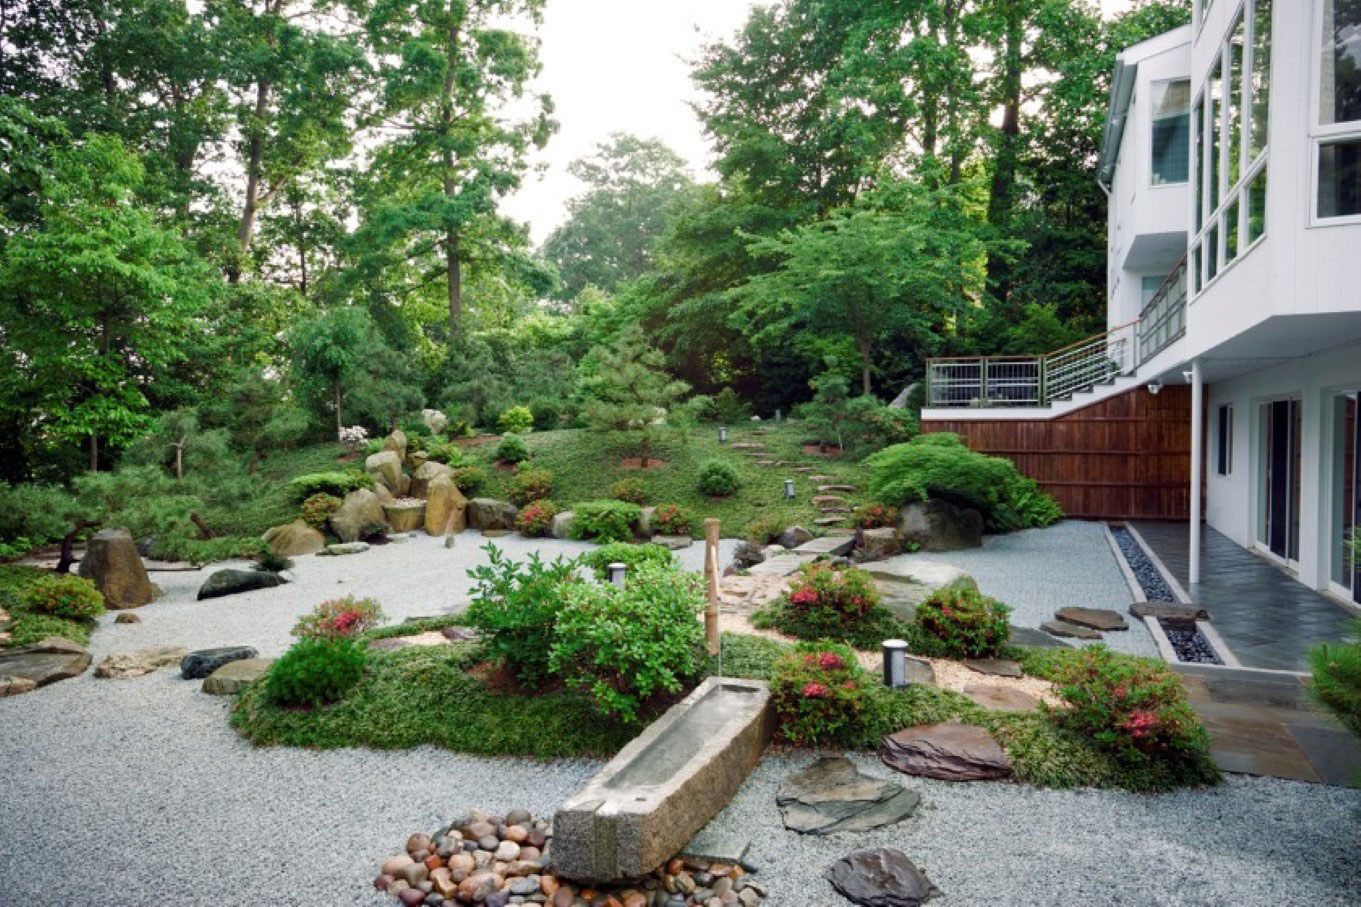 Japanese Outdoor Incredible Chic Japanese Outdoor Basin And Incredible Rock Garden With Lush Vegetation Surround Plus Gravel Garden  Awesome Gardens From Rock Garden Ideas 